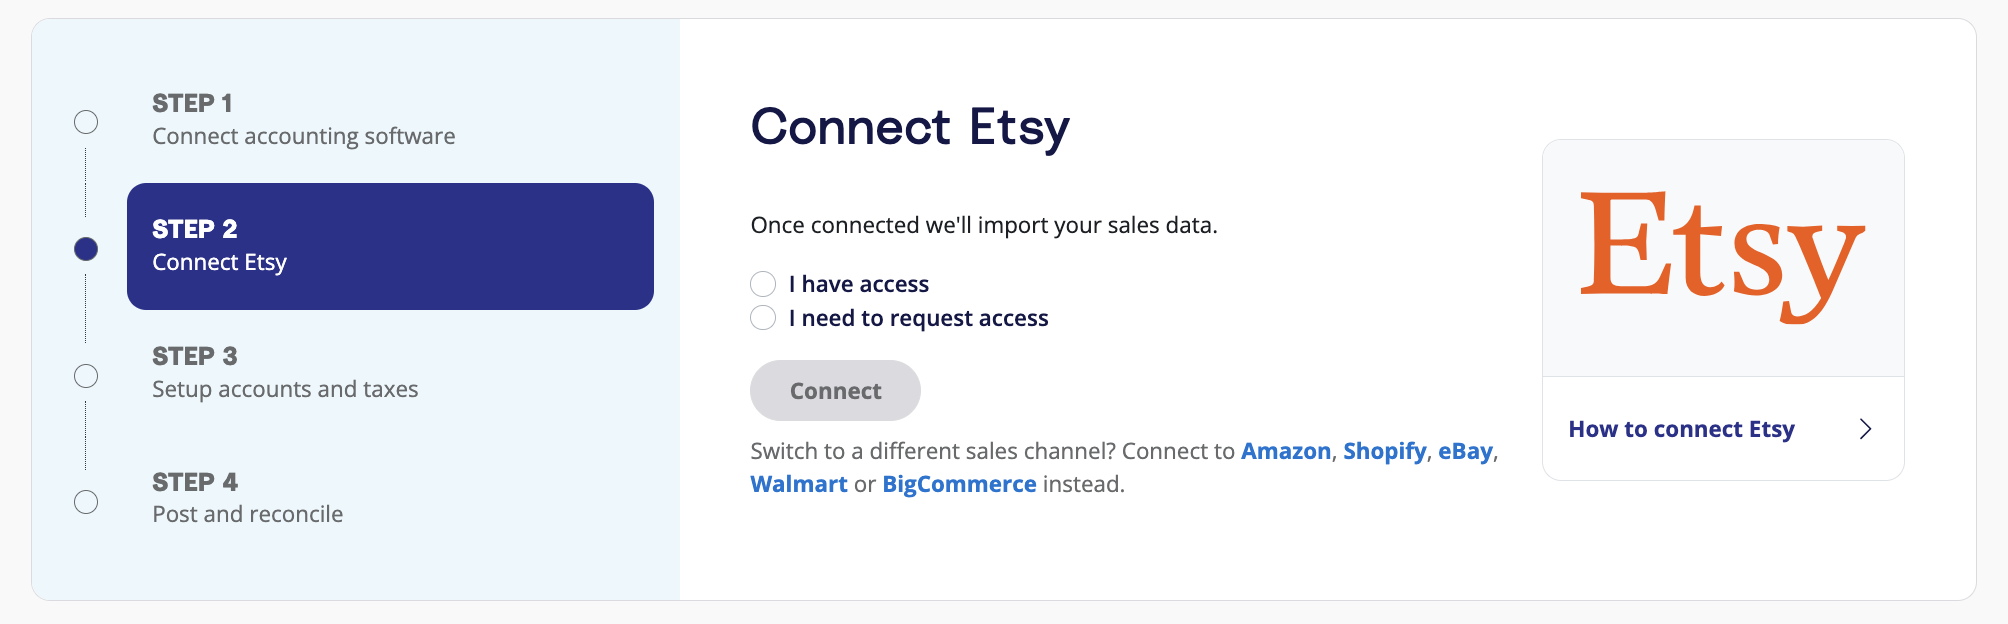 Prompt to connect to Etsy in A2X